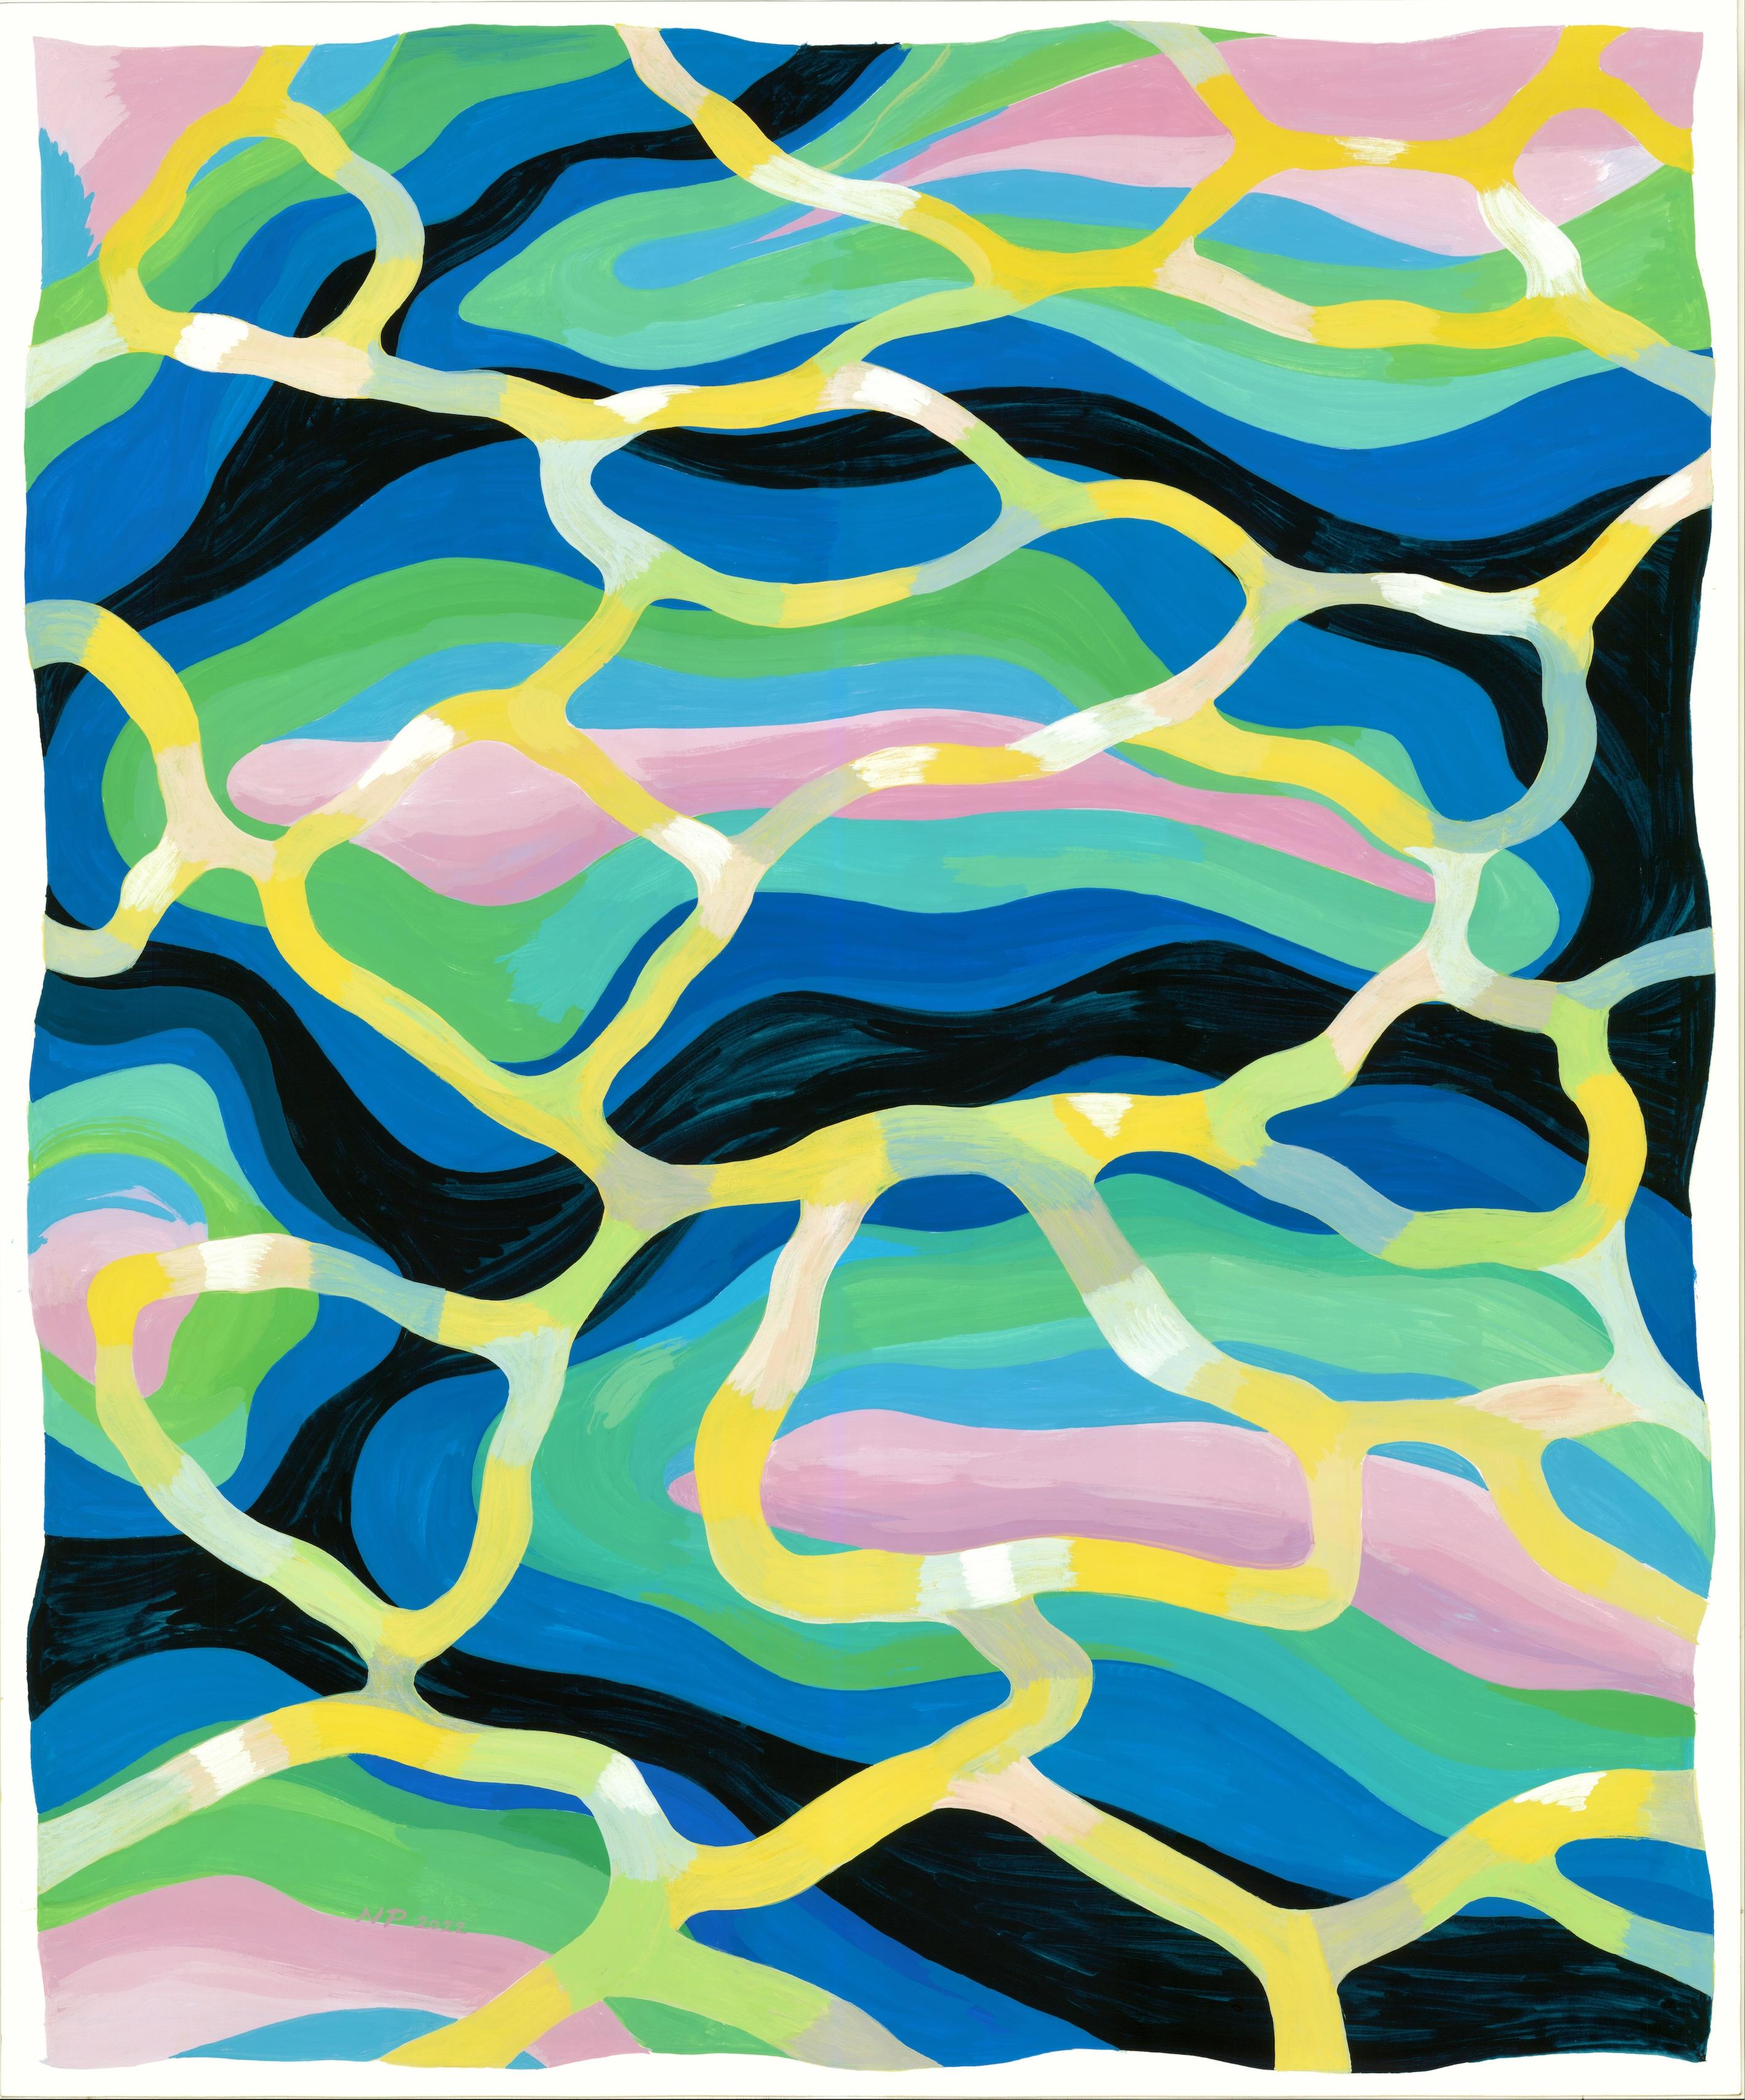 WAVING IV 
20.0 x 24.0 x 0.2, 0.5 lbs 
Gouache on paper
Hand signed by artist 

Artist's Commentary: 
"This is a gouache painting created in an abstract manner but inspired with sea waves movement and reflections on the sea surface. It is part of